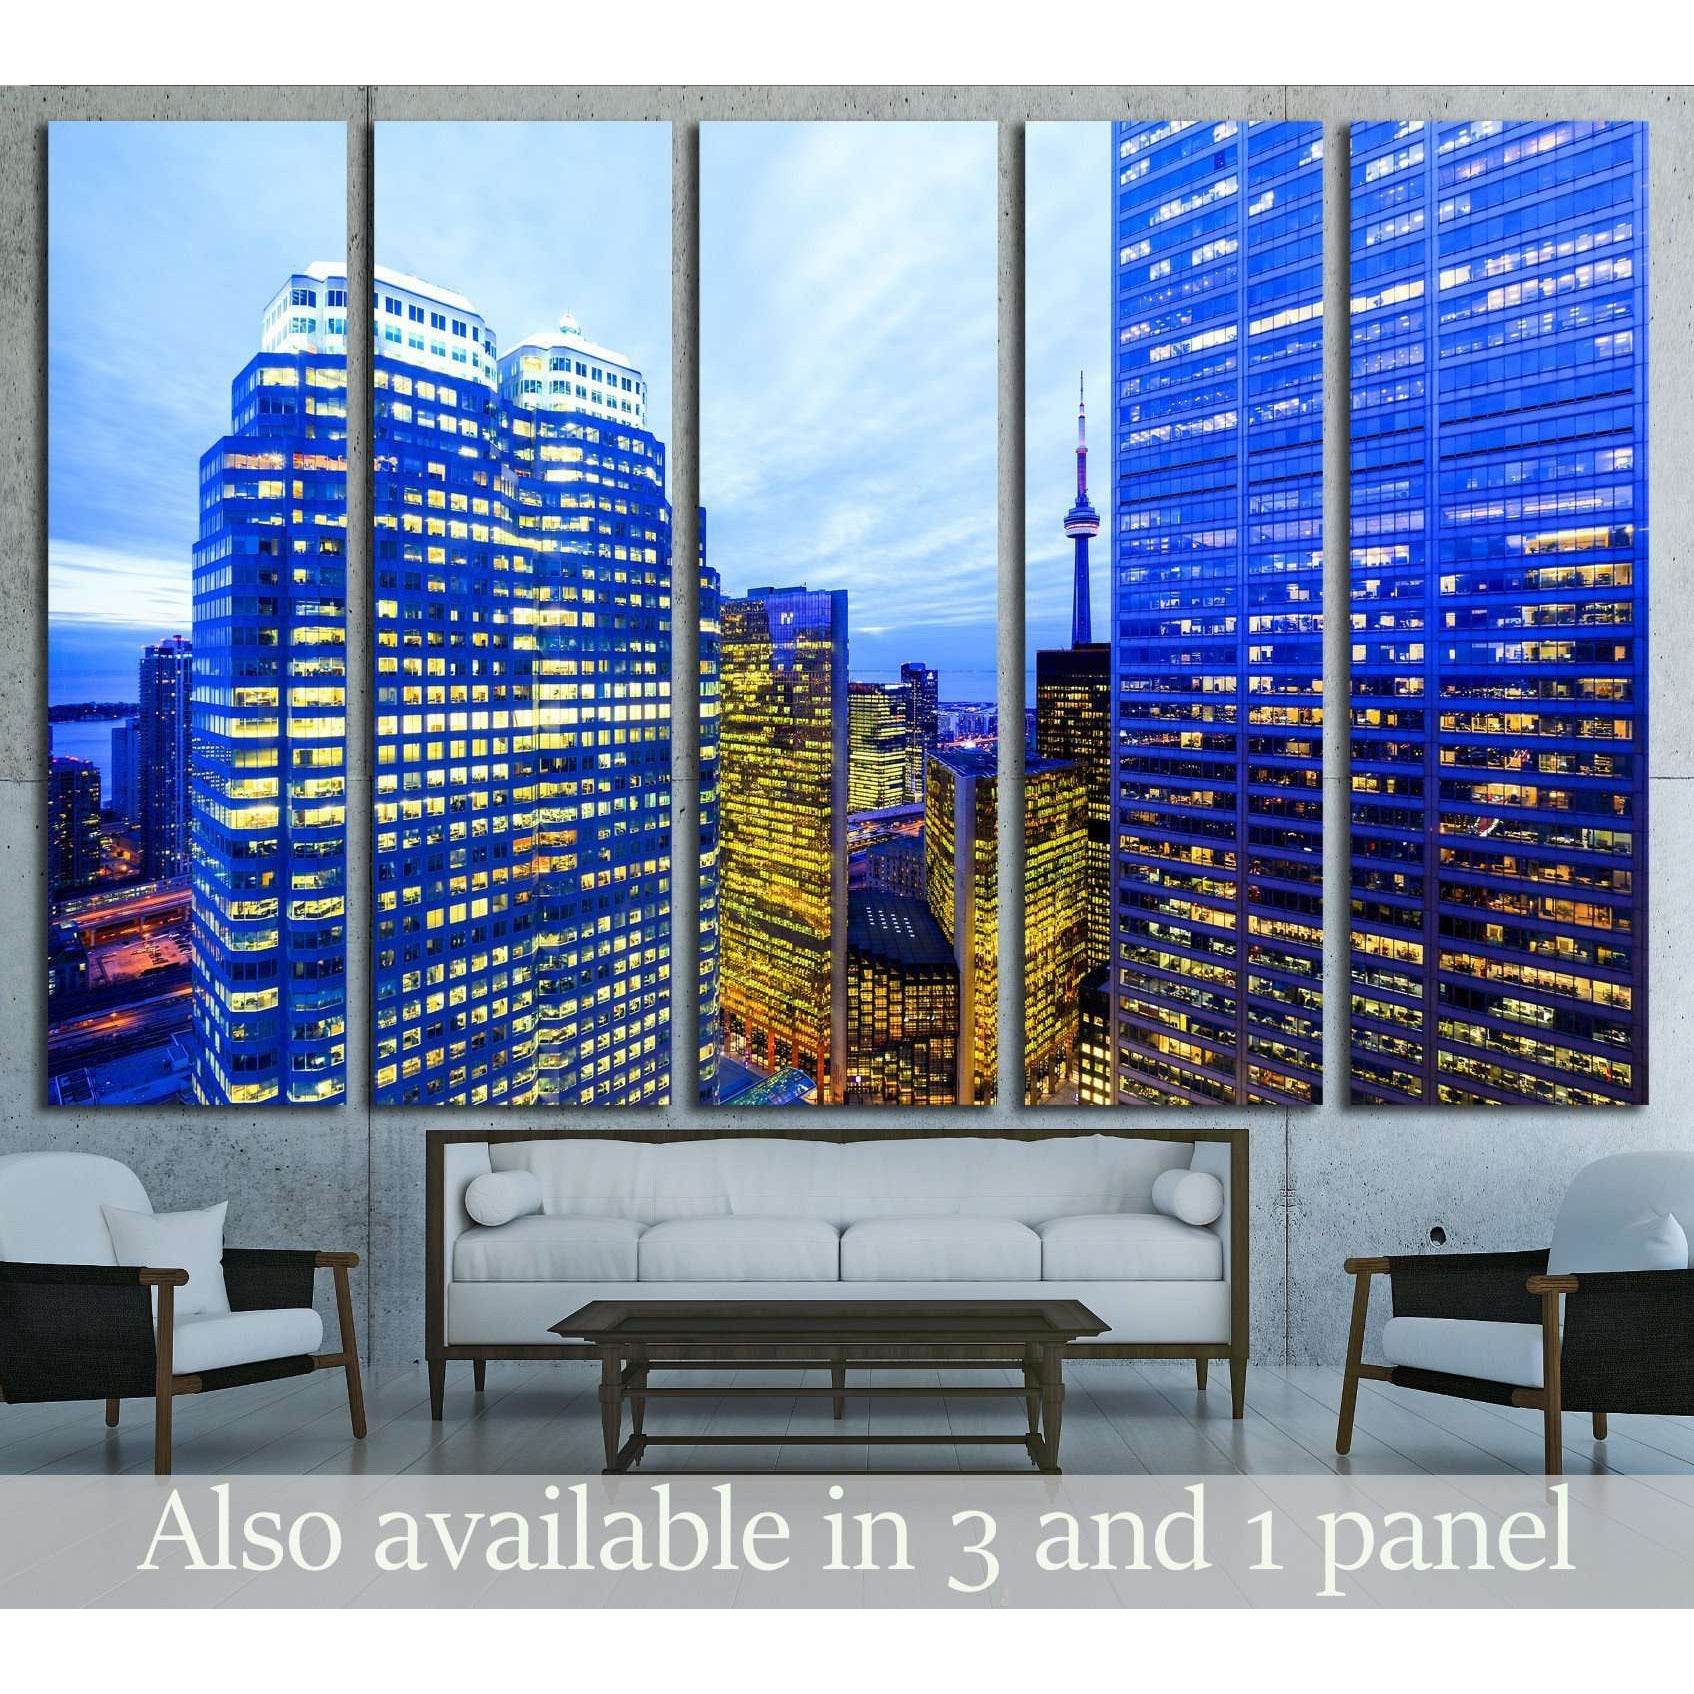 CANADA, Toronto Downtown Core at night №2070 Ready to Hang Canvas Print